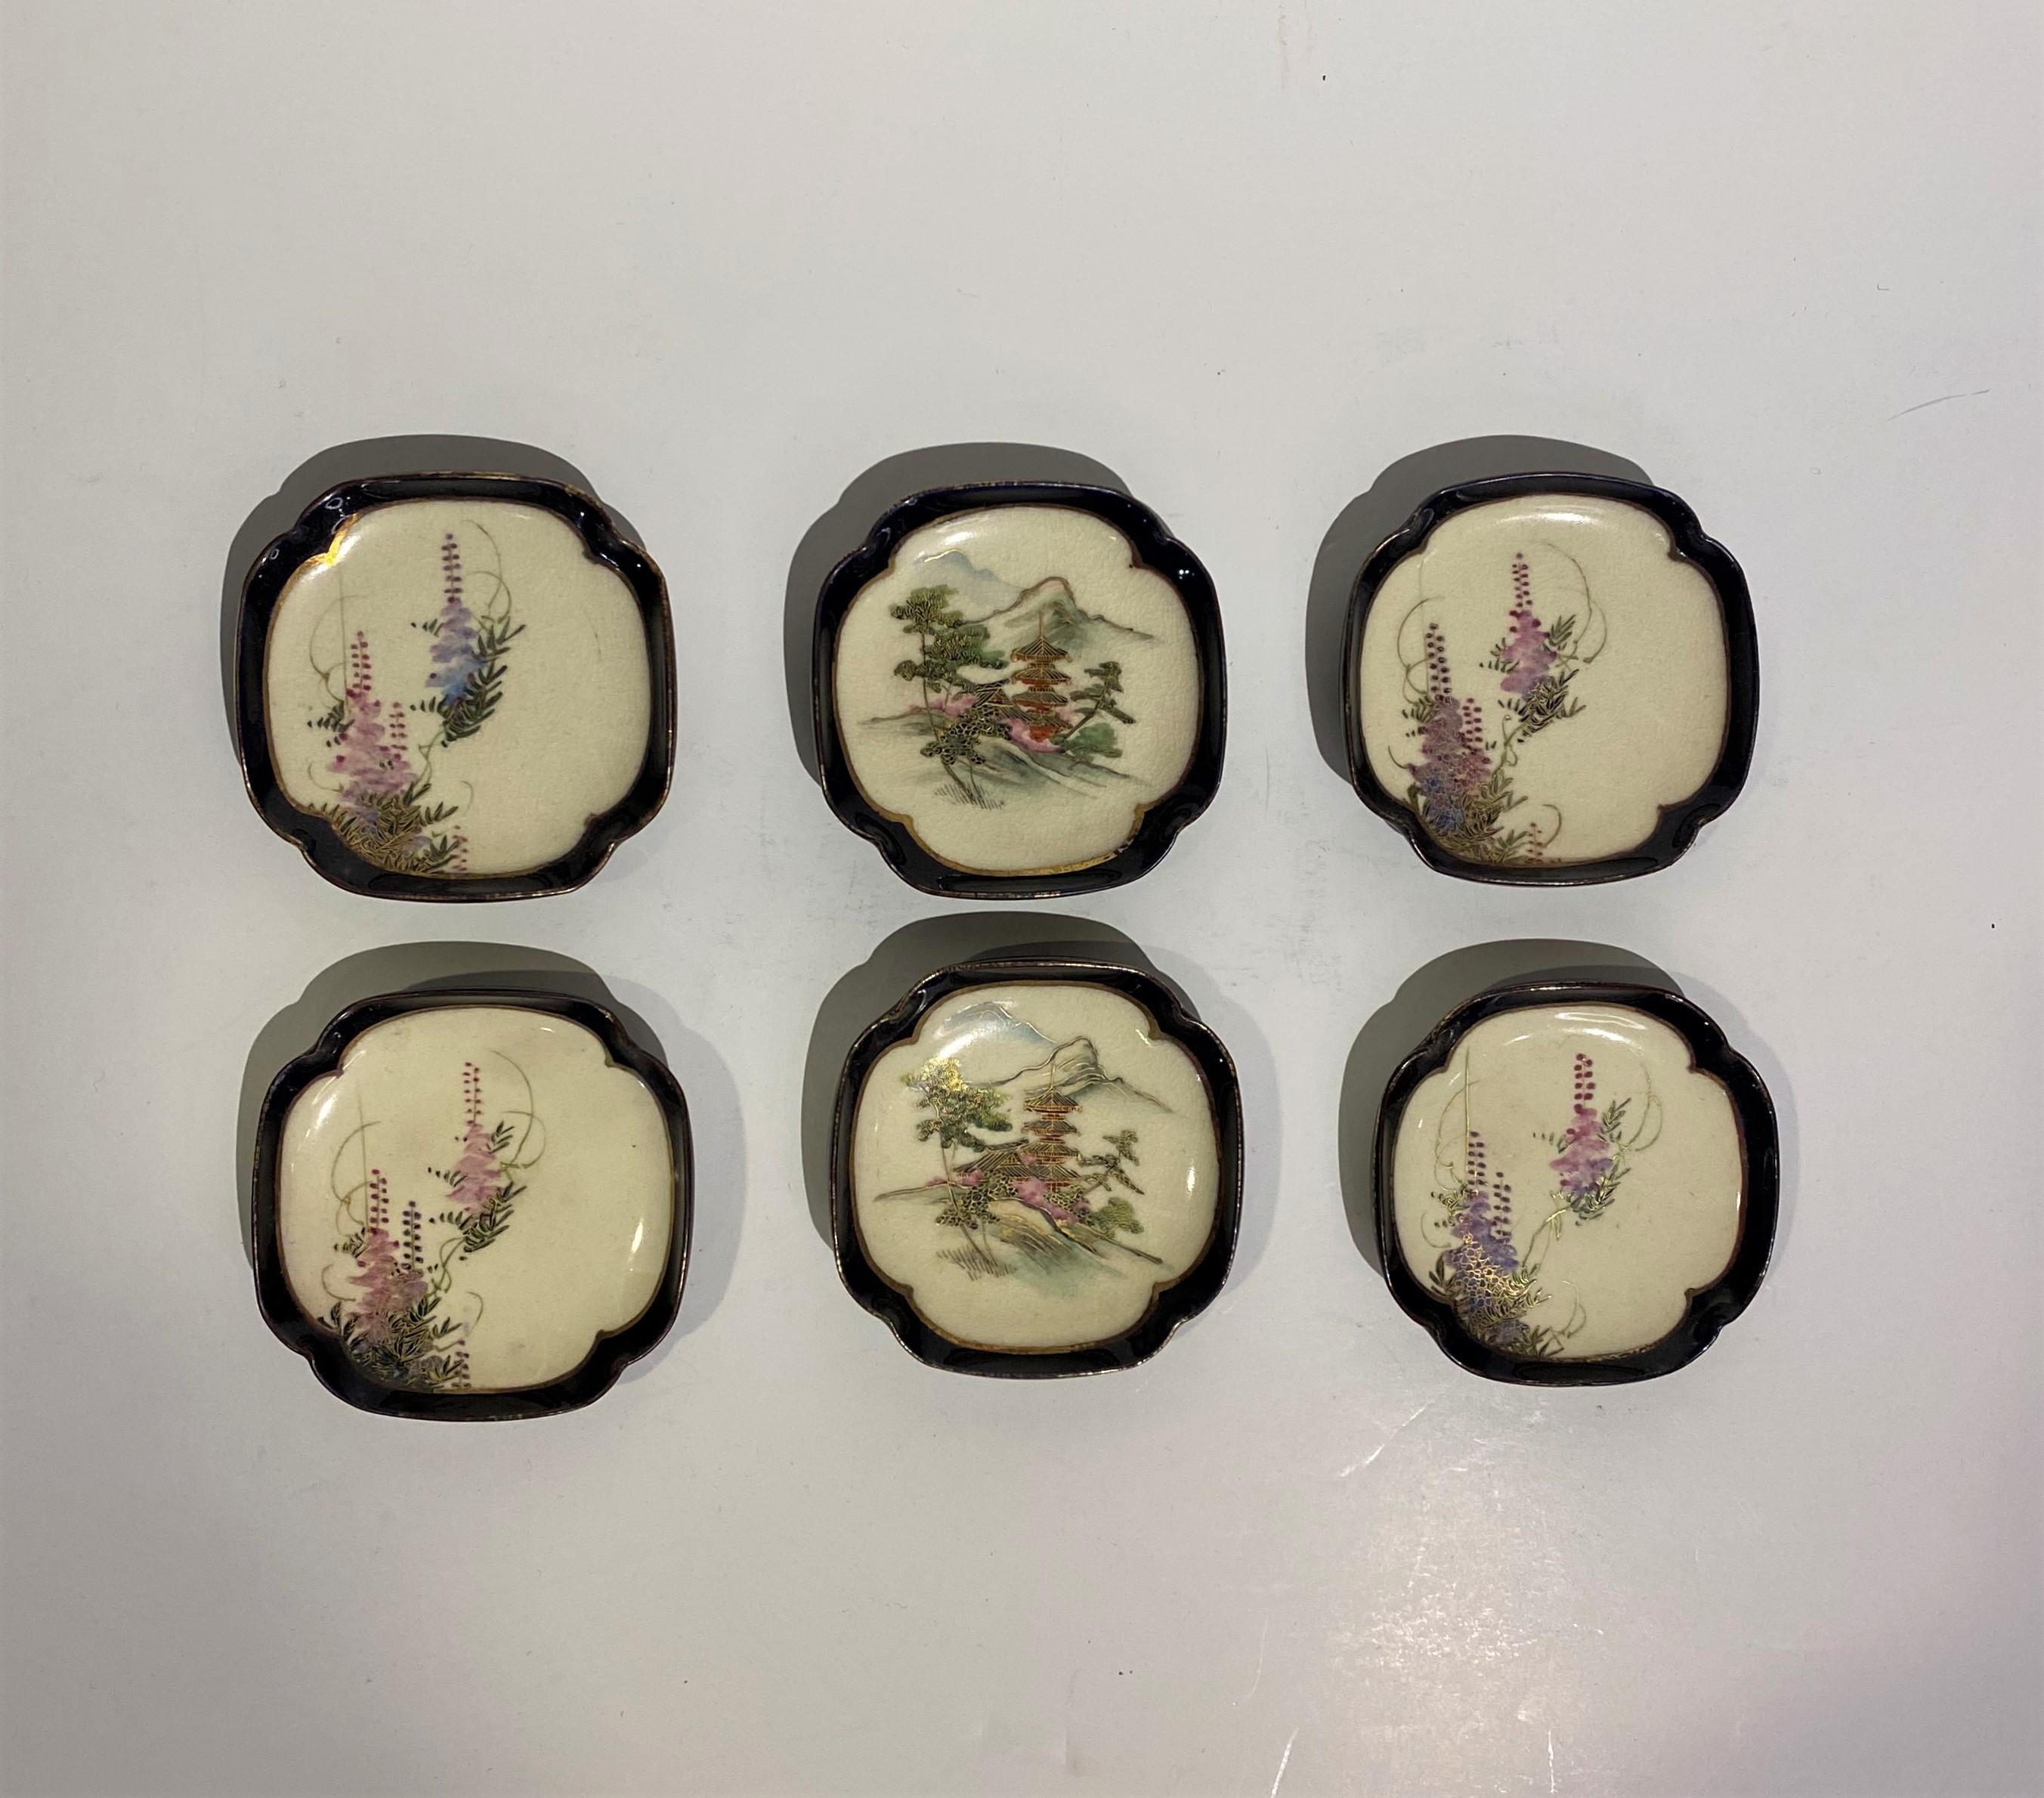 The attractive set of 19th-century small, shaped, hand-painted Satsuma pin trays is a collection of delicate and ornate pieces that showcase the artistry of Satsuma ware from the Meiji period in Japan.

Each pin tray in the set is crafted with